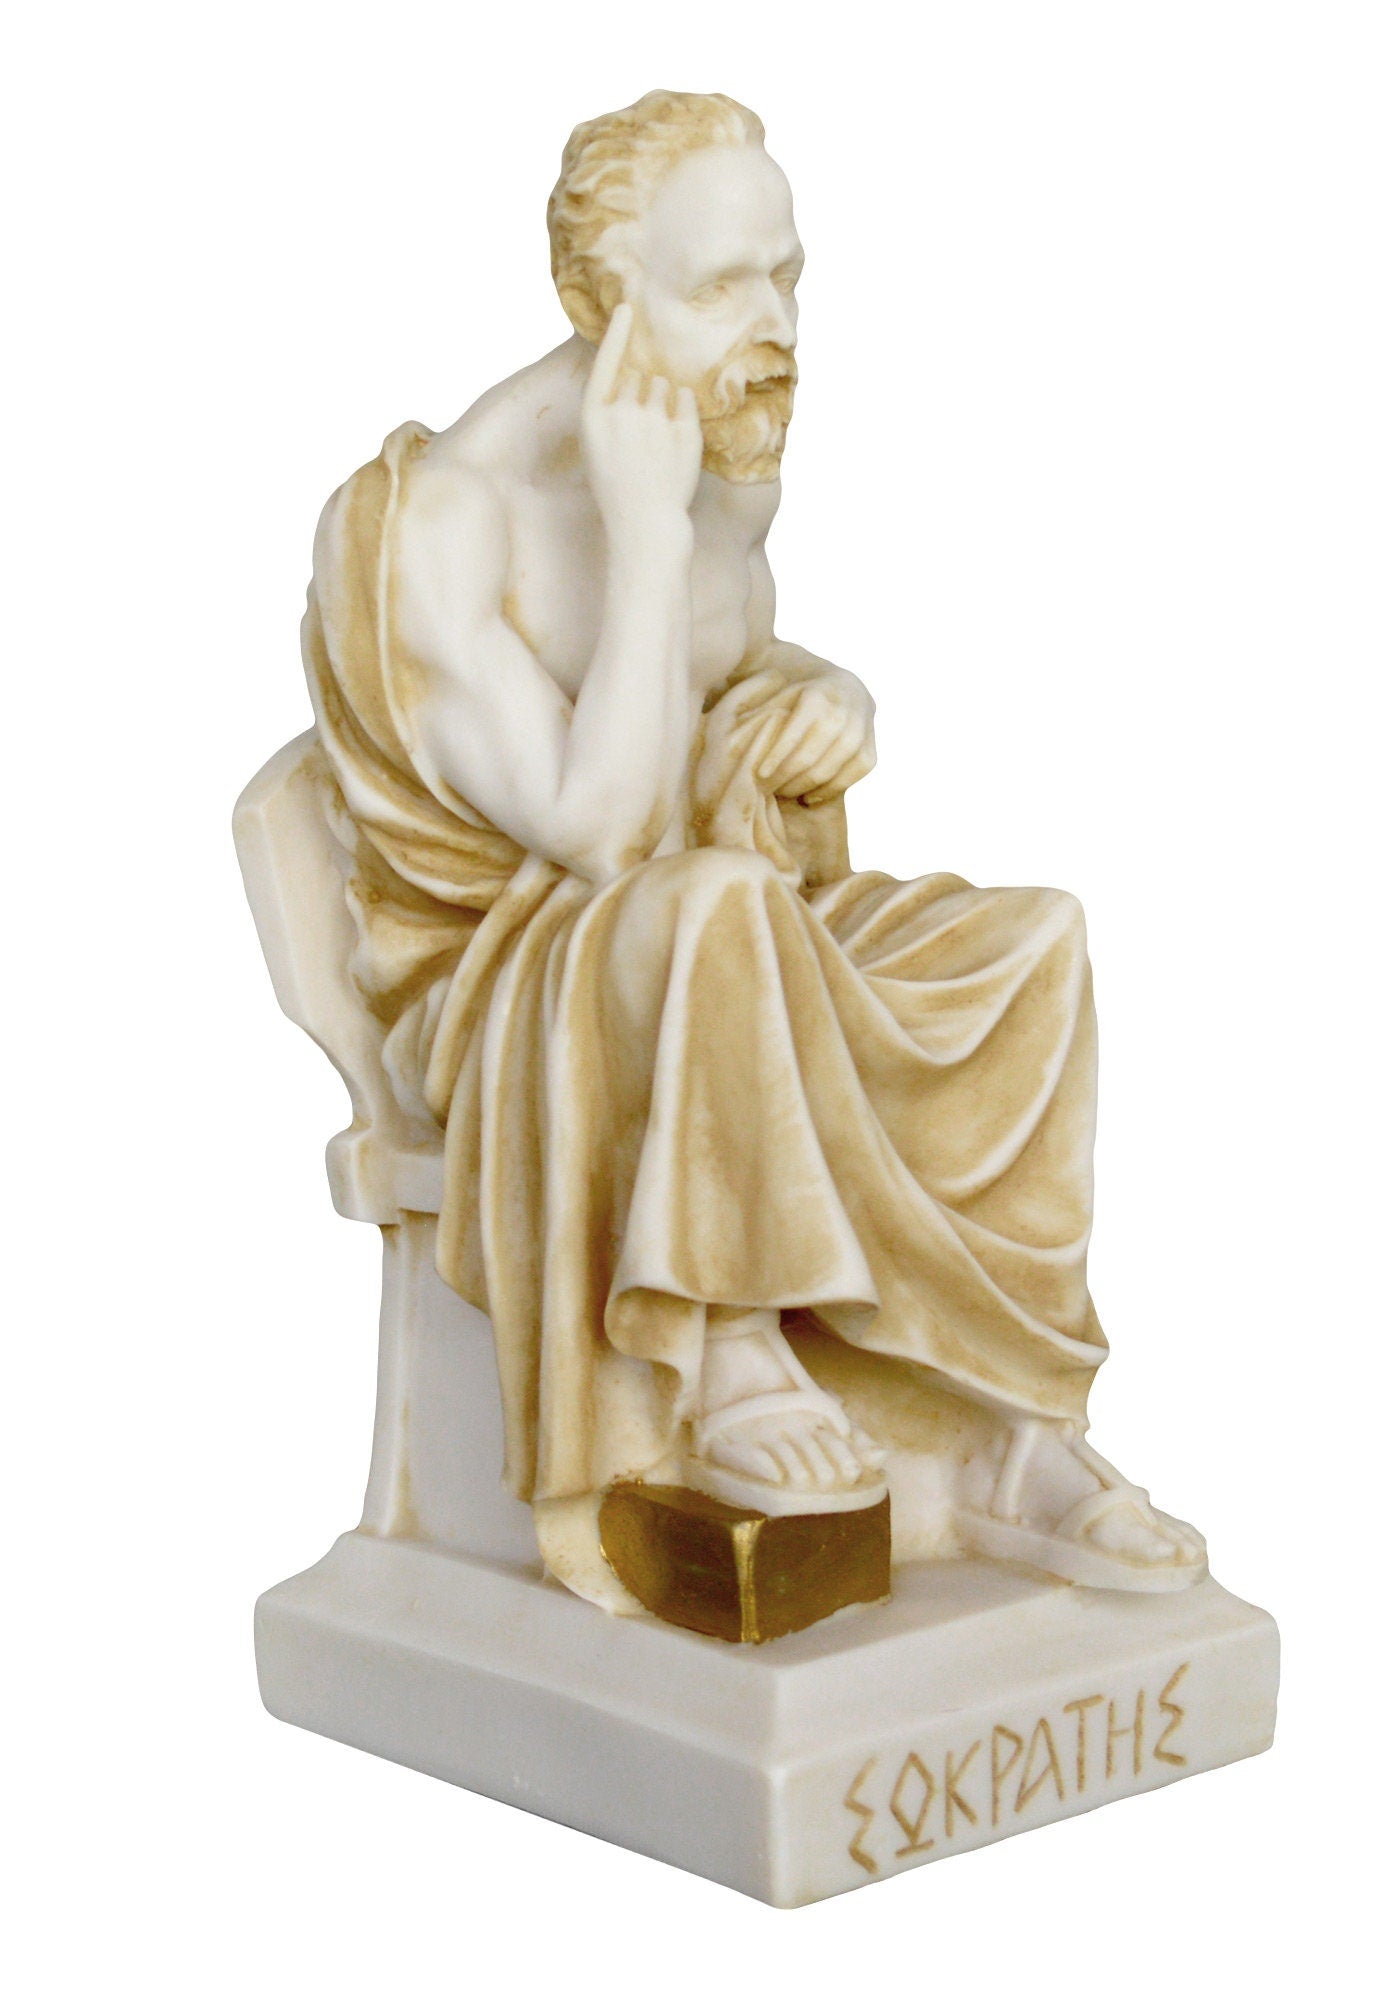 Socrates - Ancient Greek Philosopher - 470-399 BC - Teacher of Plato - Father of Western Philosophy - Aged Alabaster Sculpture